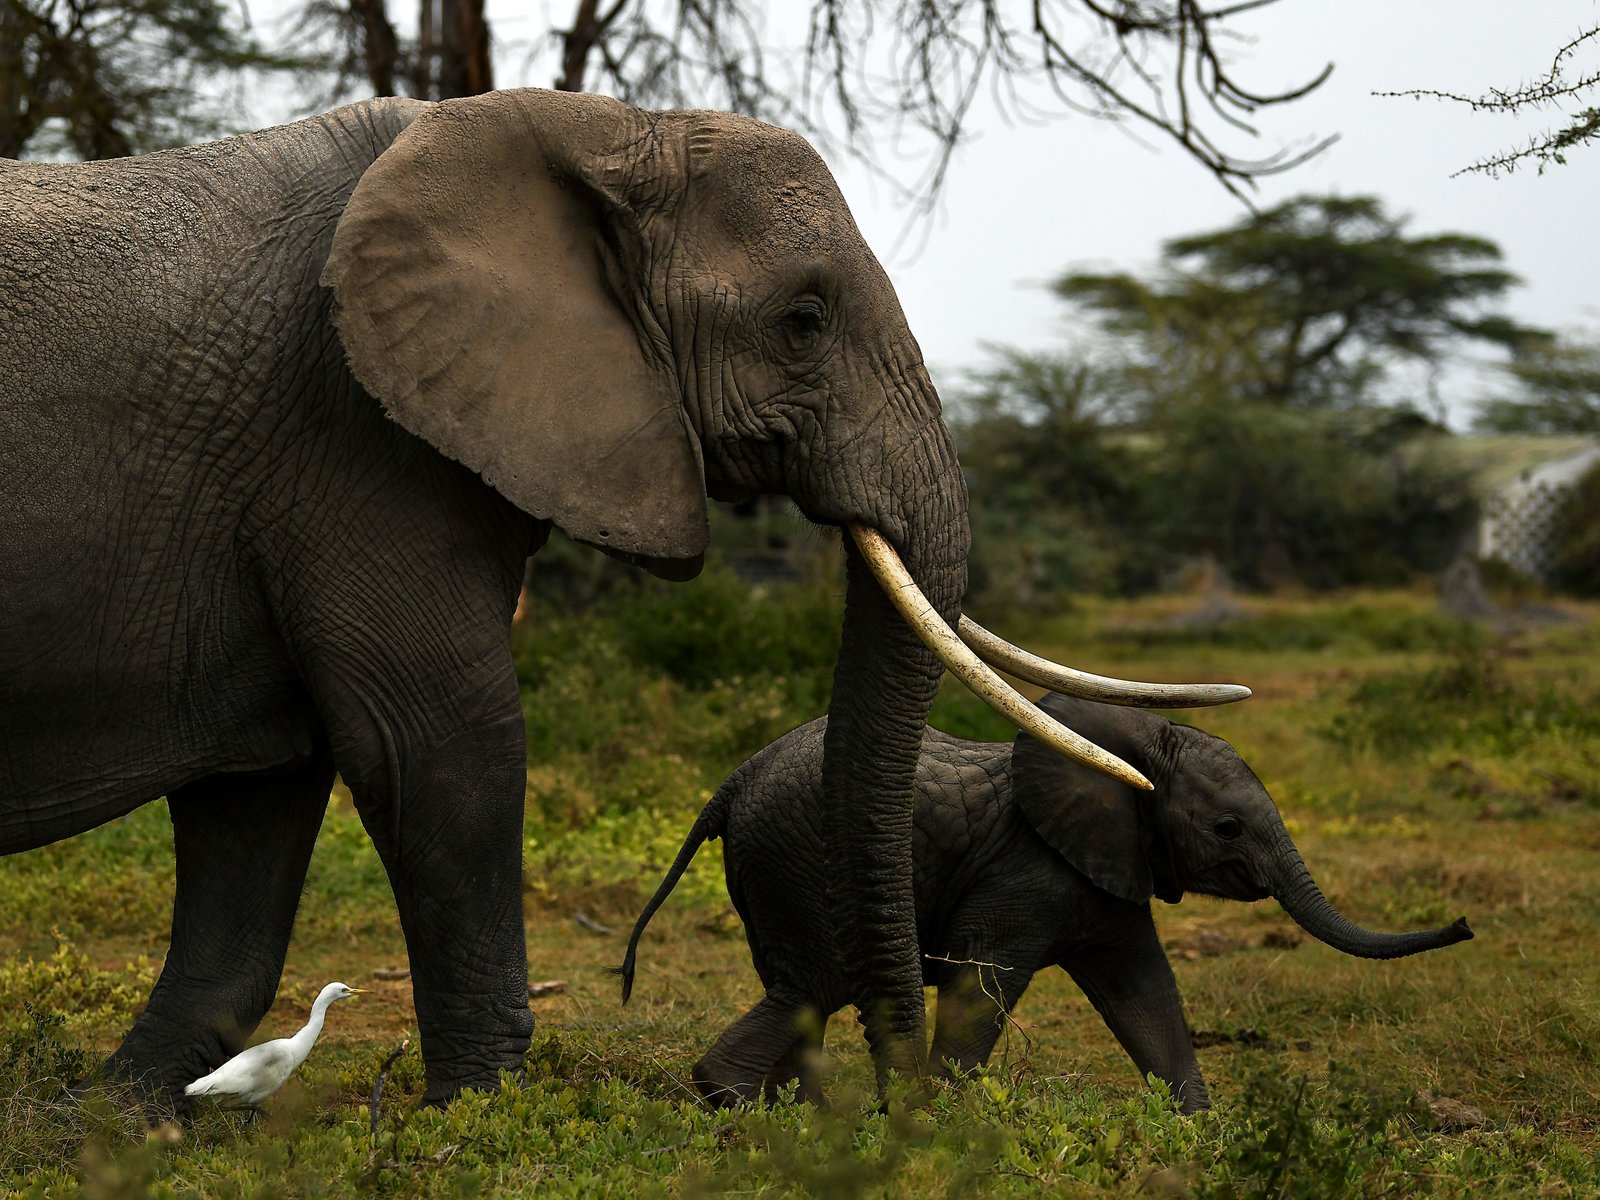 A mother elephant with her calf amble along as they head for a nearby marsh on World Elephant Day at the Amboseli National Park (365 kilometres southeast of the capital Nairobi) near Oloitiktok in Kajiado east county on August 12, 2020. (Photo by TONY KARUMBA / AFP) (Photo by TONY KARUMBA/AFP via Getty Images)